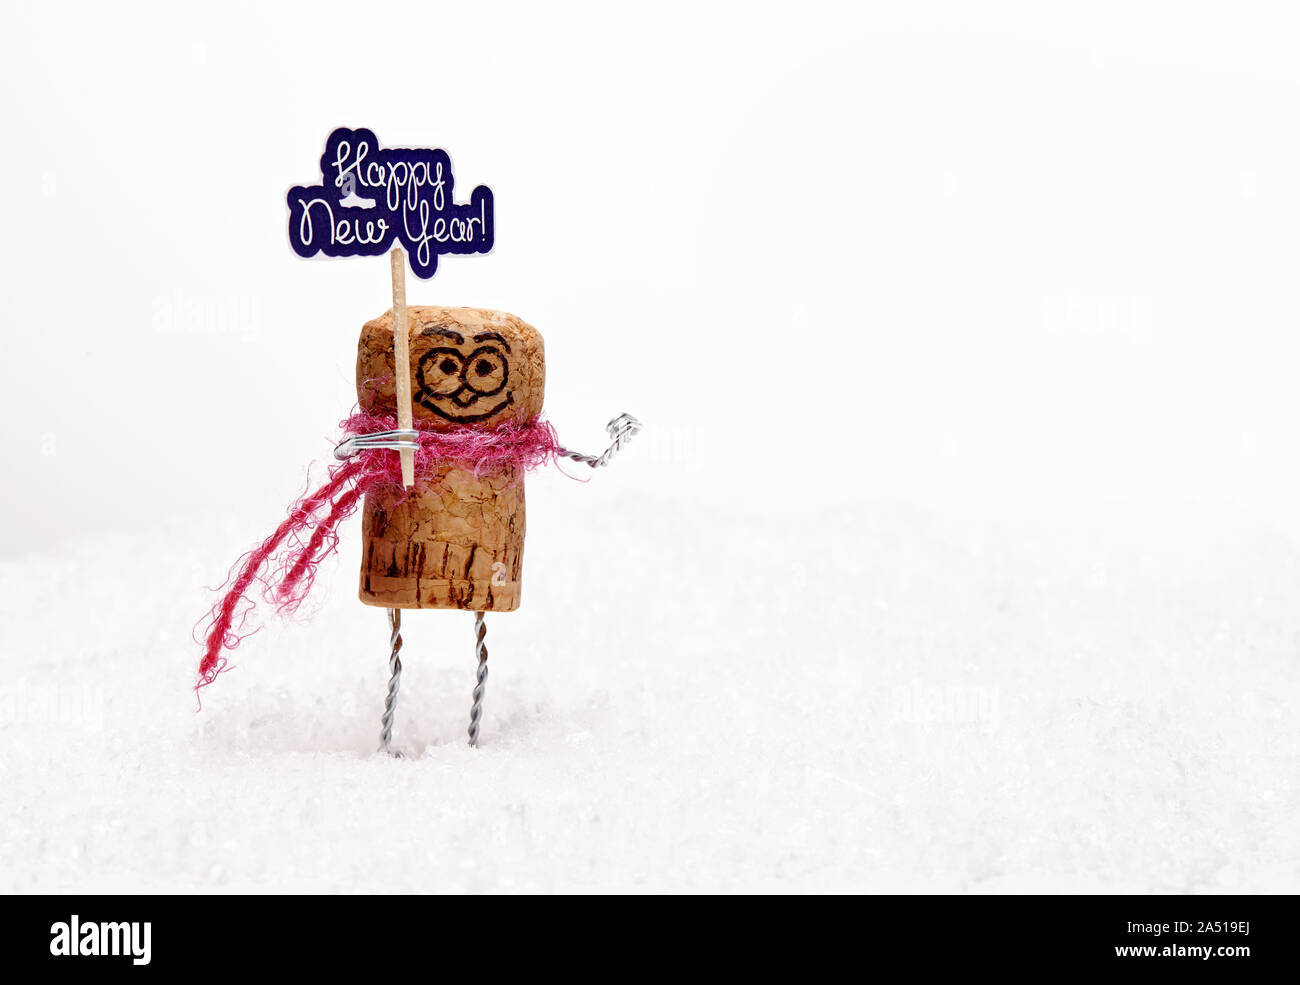 Funny wine cork manikin on white snow wishes anybody 'happy new year'. New Year composition with toys. Stock Photo